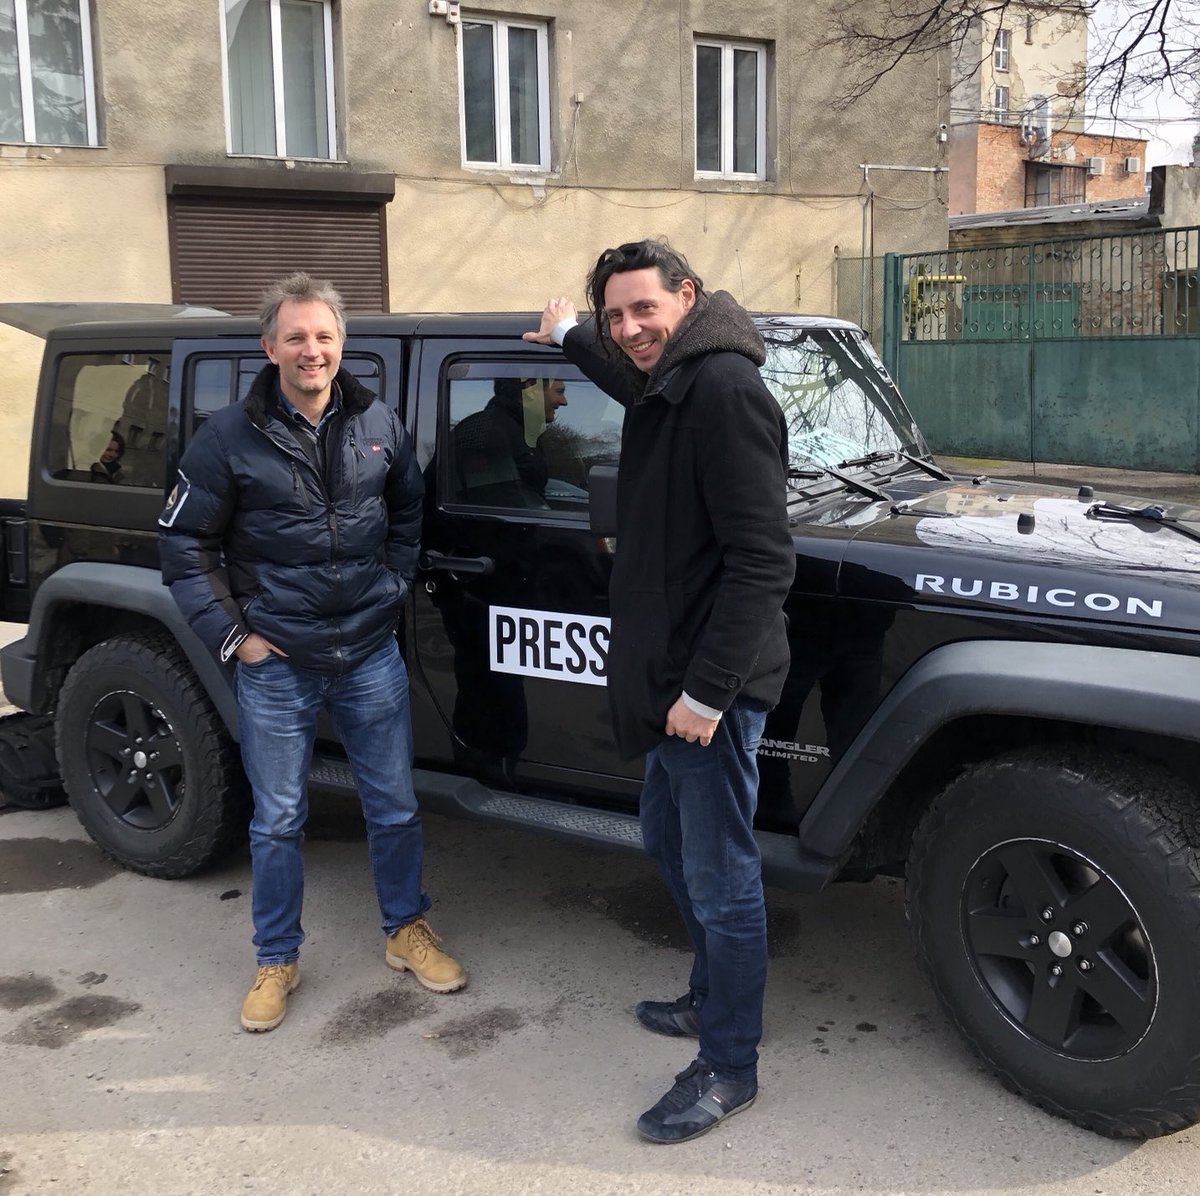 Heading for the Slovak border ex-Lviv with the legendary Bram Verbeke, RTE cameraman. Big thanks for all best wishes and “stay safes”, and to all colleagues in Dublin who have been incredibly supportive. And humble thanks to our hosts, the people of Ukraine who have horrors ahead